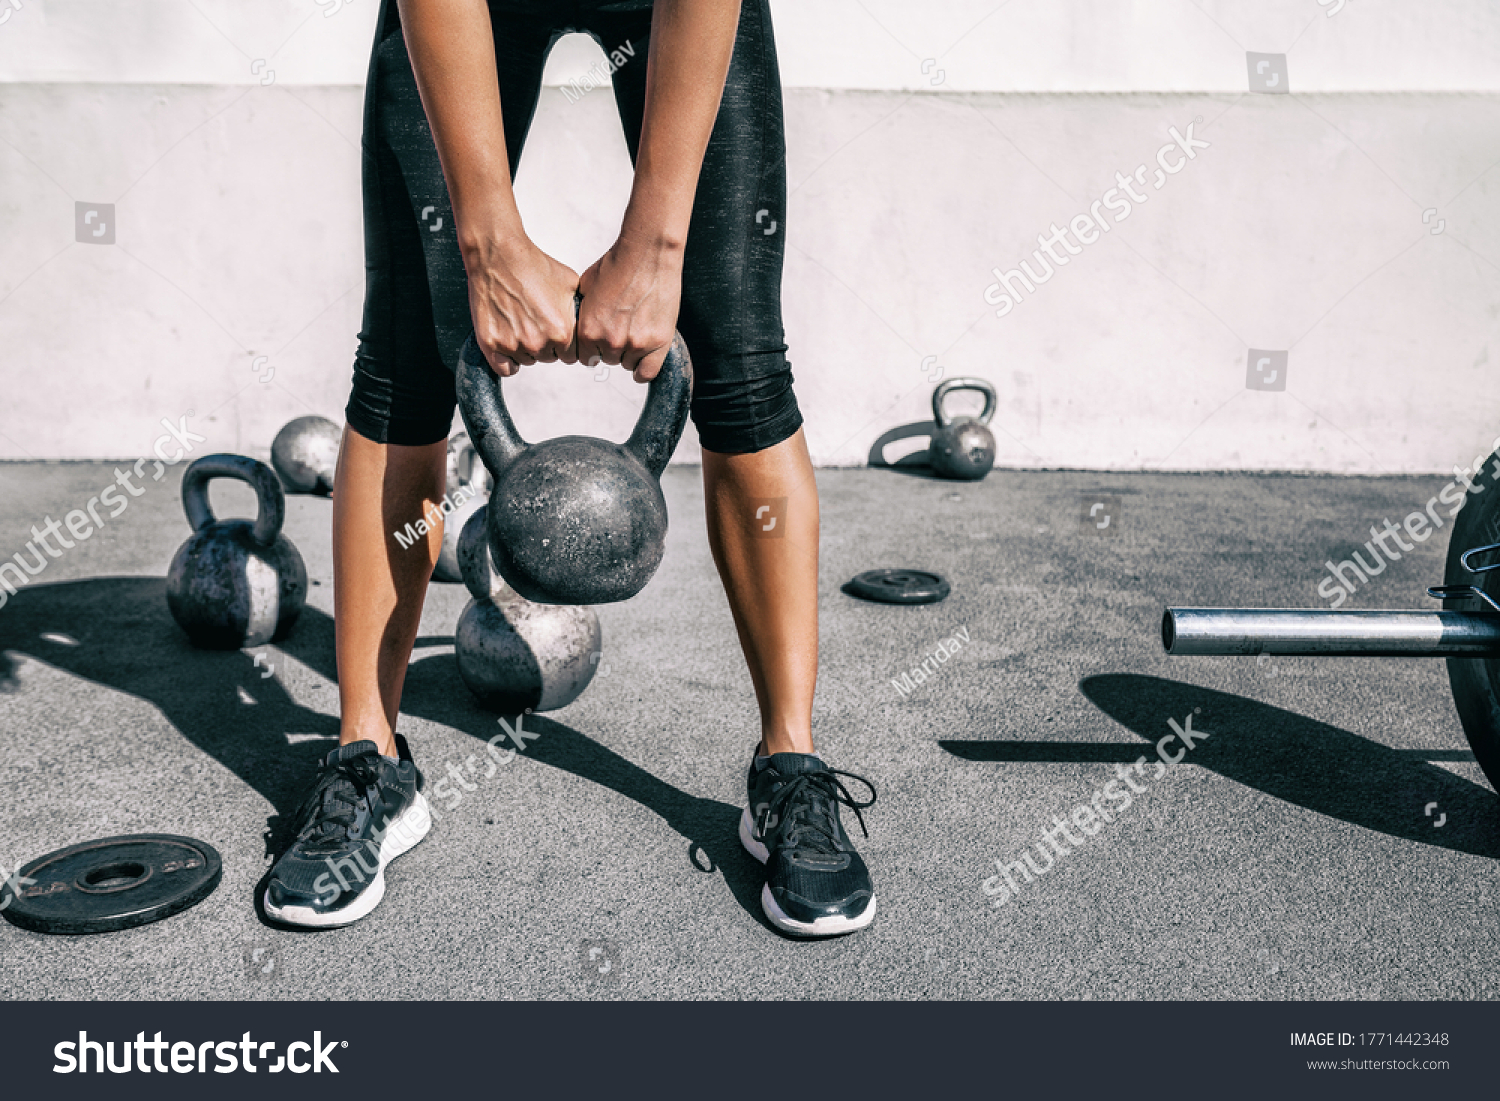 Kettlebell weightlifting athlete woman lifting weight at outdoor fitness gym. Lower body legs and feet closeup of strength training legs, glutes and back lifting free weights. #1771442348